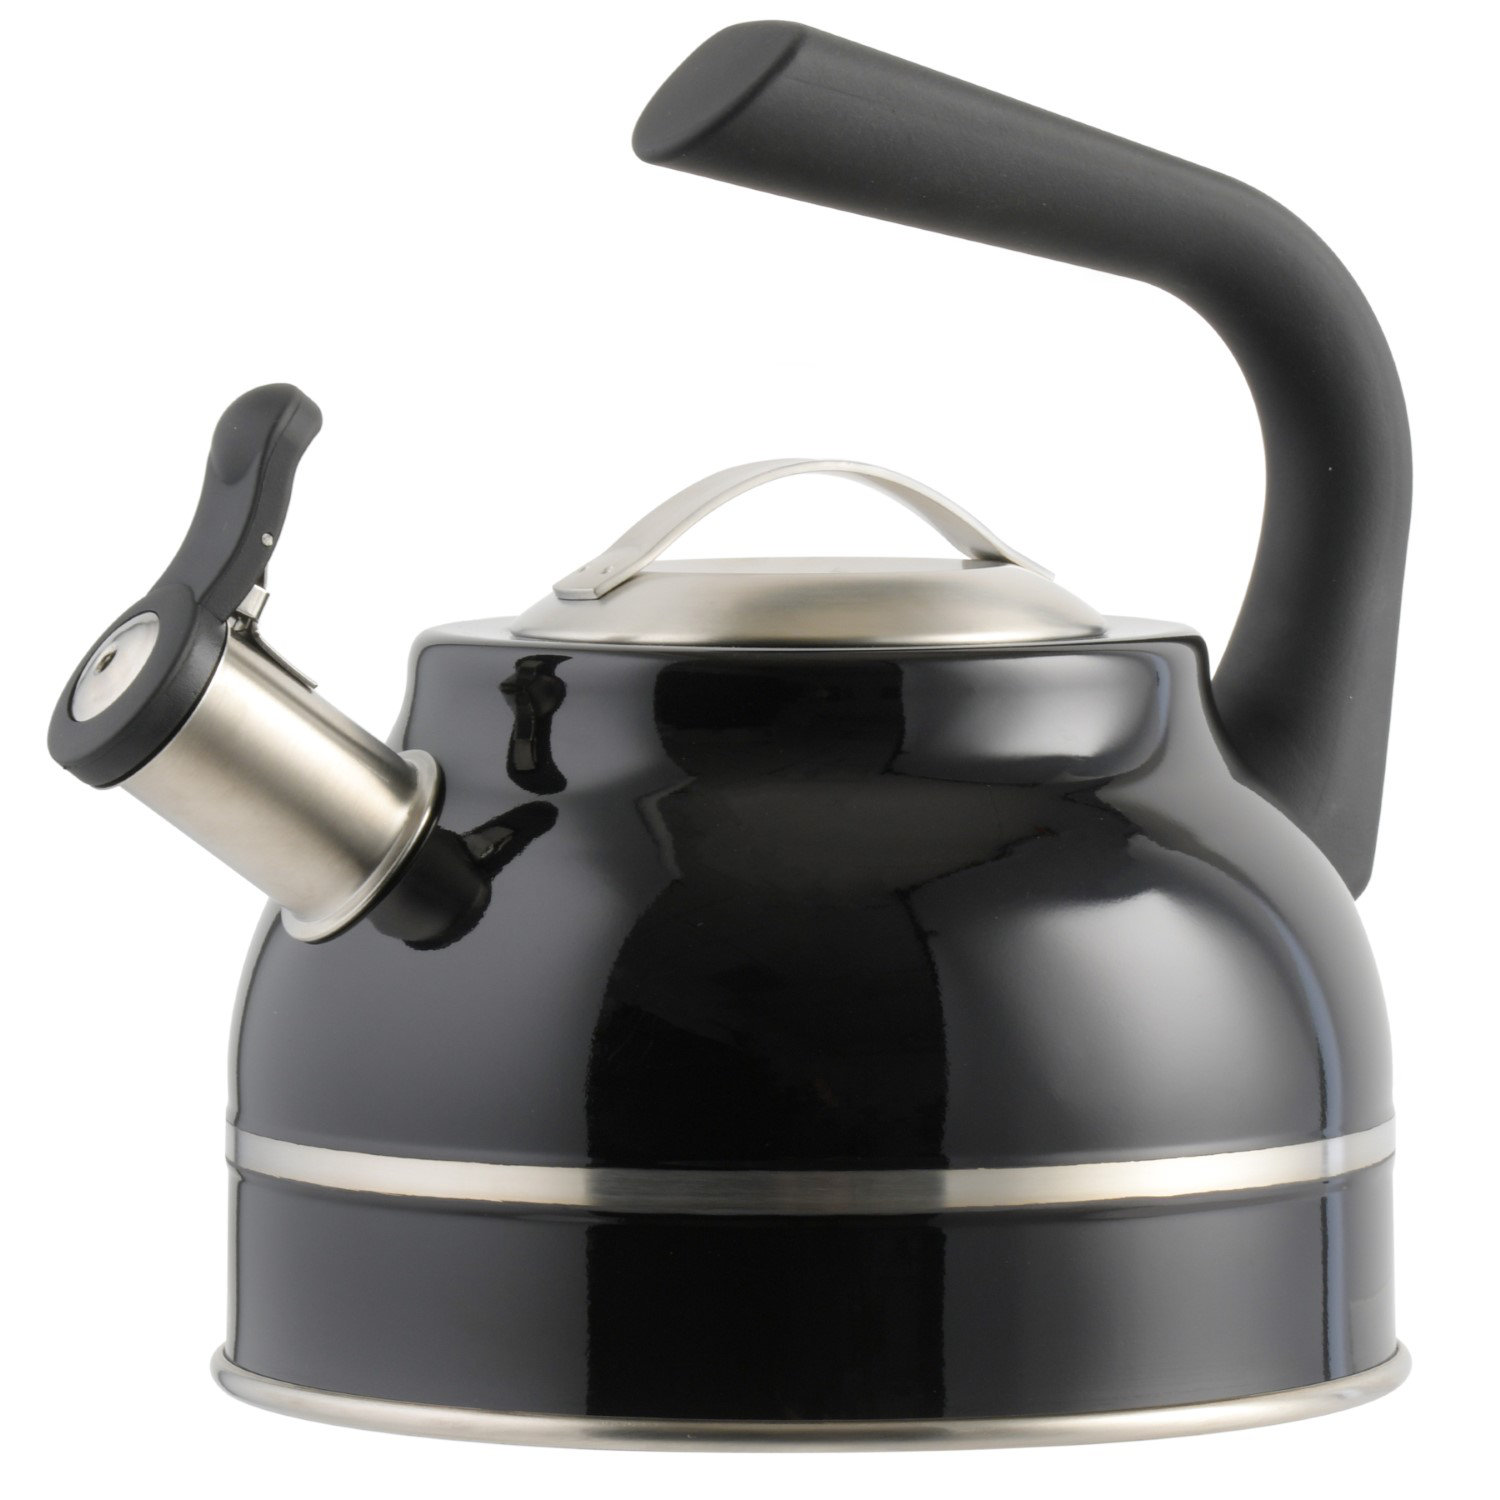 Circulon Stainless Steel Whistling Induction Teakettle with Flip